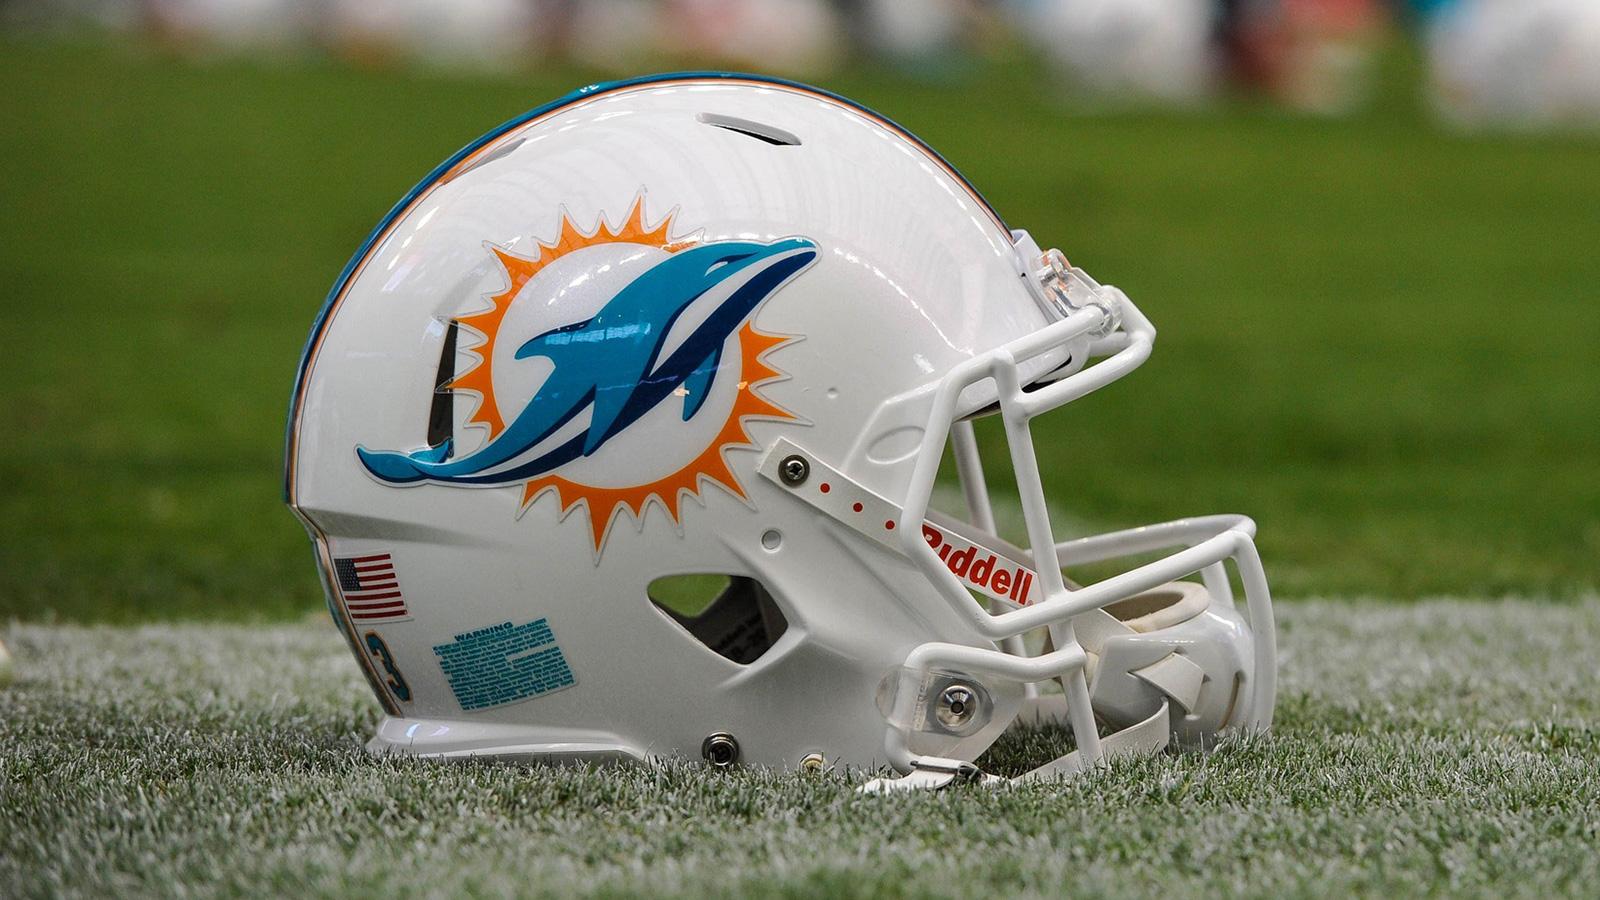 Miami Dolphins Wallpaper. Free Image Download For Android, Desktop